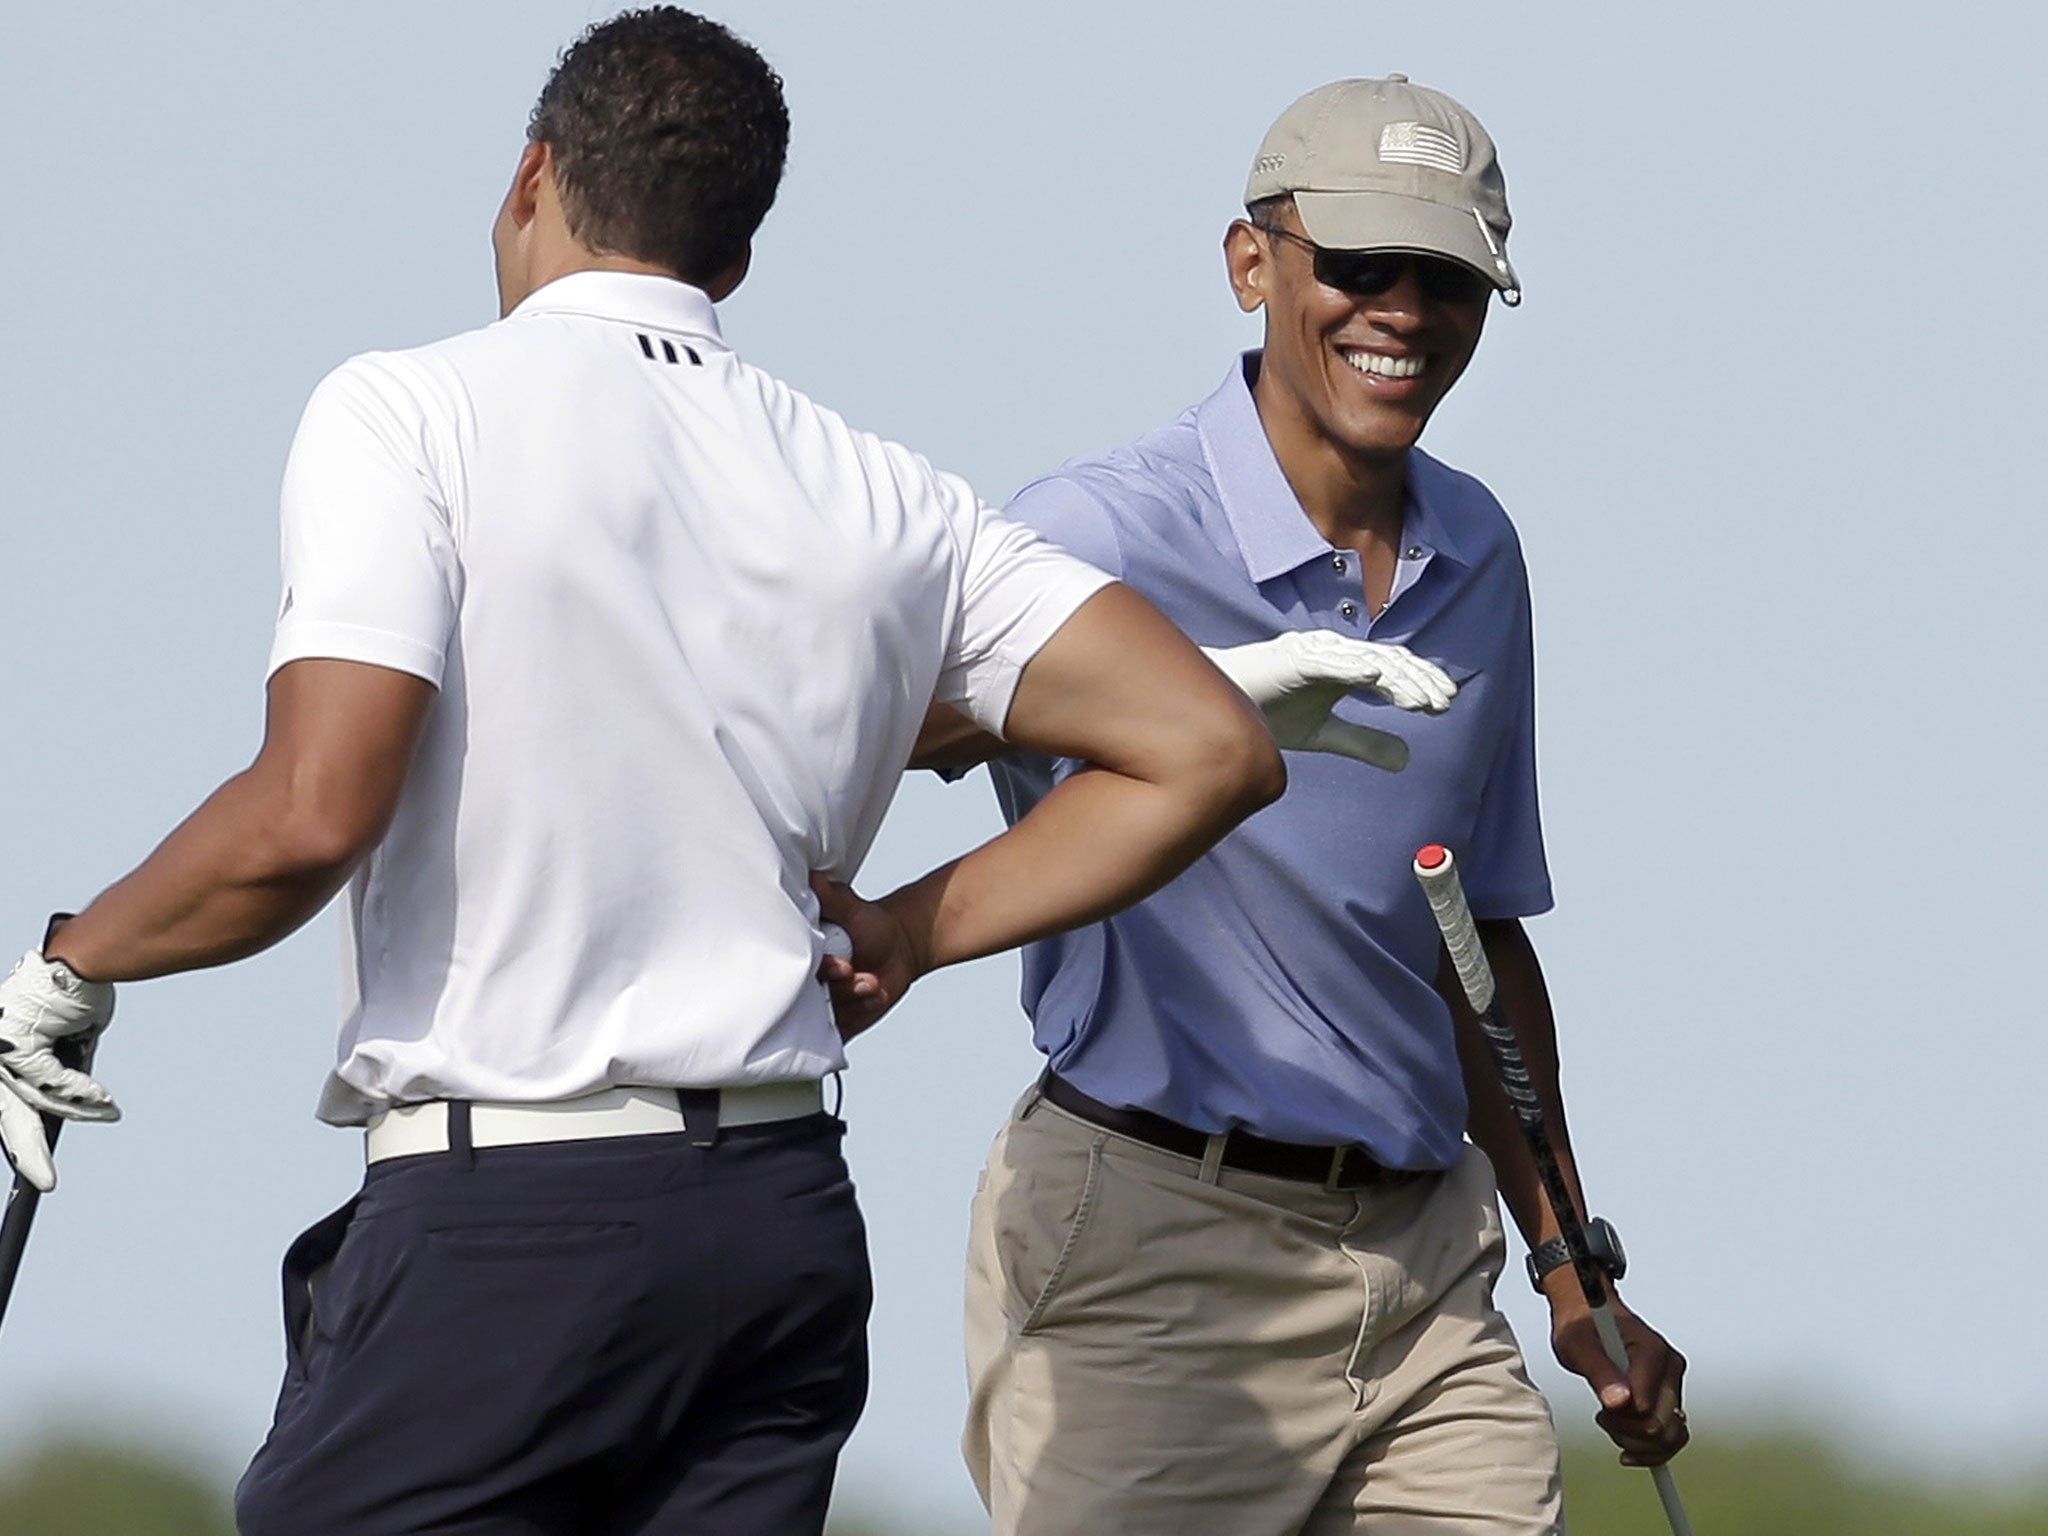 President Barack Obama, right, smiles as he gives a pat on the arm to Cyrus Walker, left, cousin of White House senior adviser Valerie Jarrett, while golfing at Vineyard Golf Club, Tuesday, Aug. 12, 2014, in Edgartown, Mass., on the island of Martha's Vin